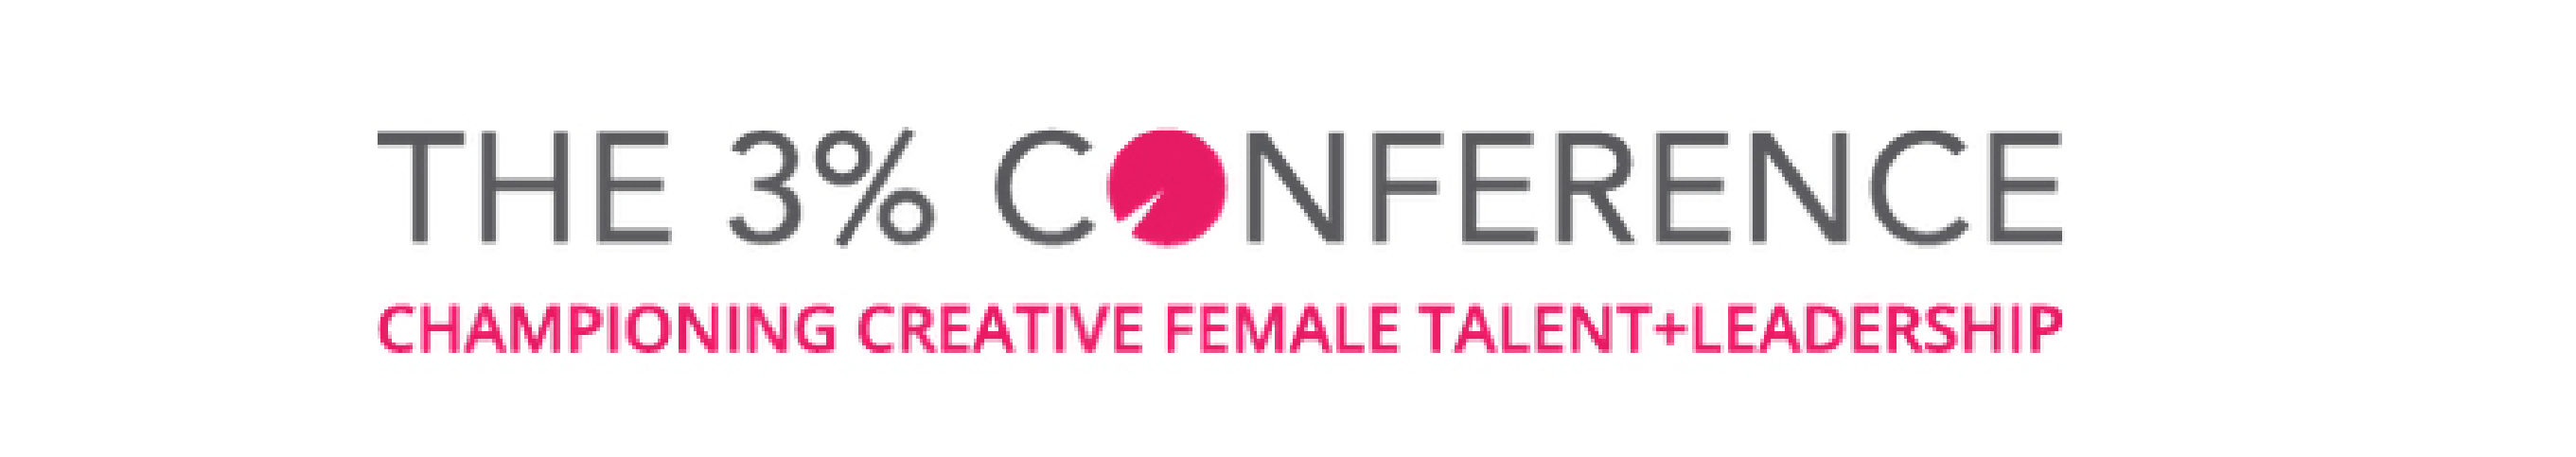 The 3% Conference logo